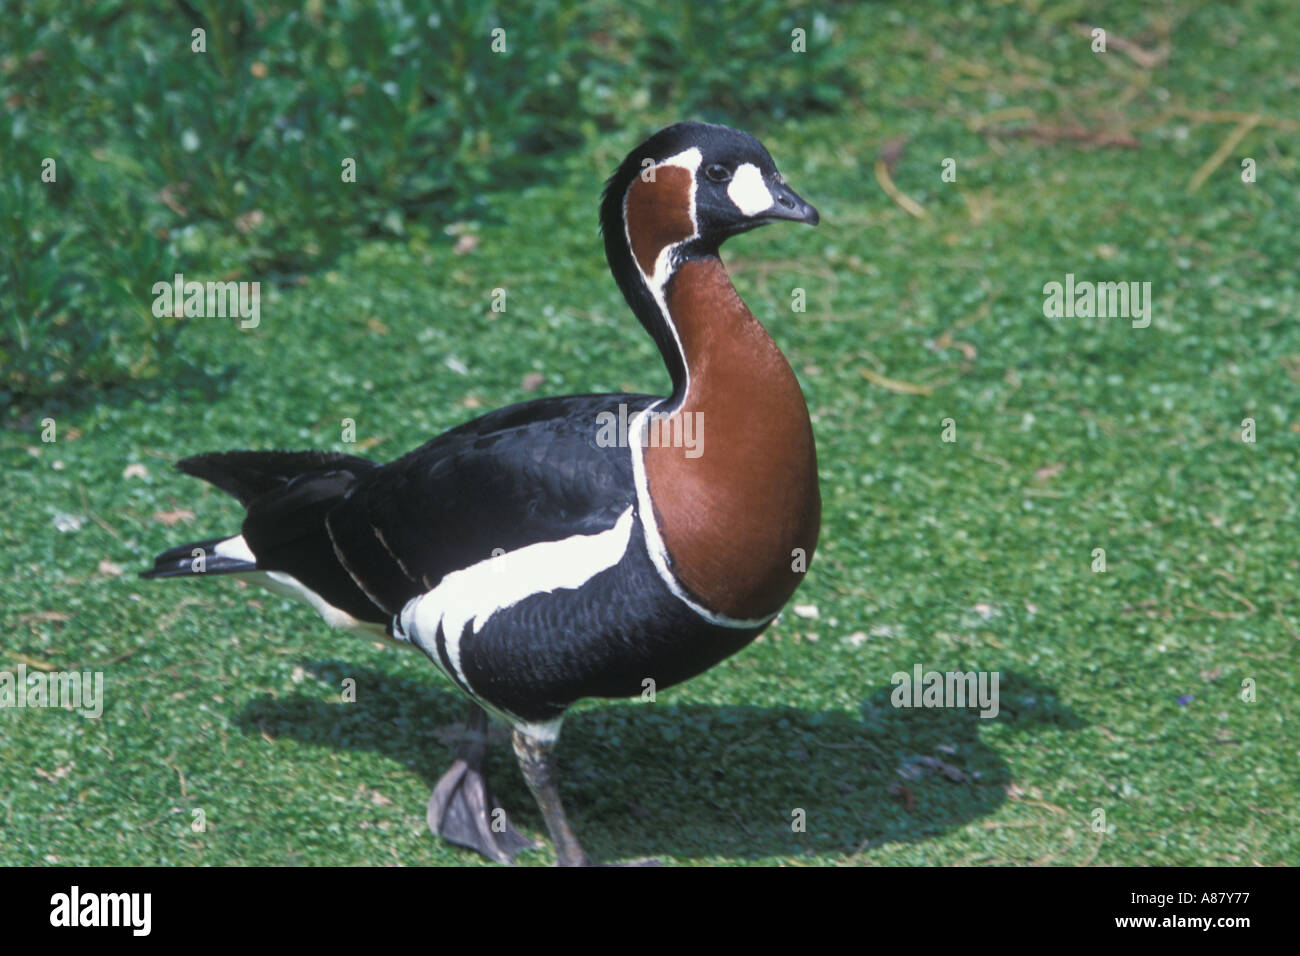 Harlequin Duck Histrionicus histrionicus Walking Stock Photo